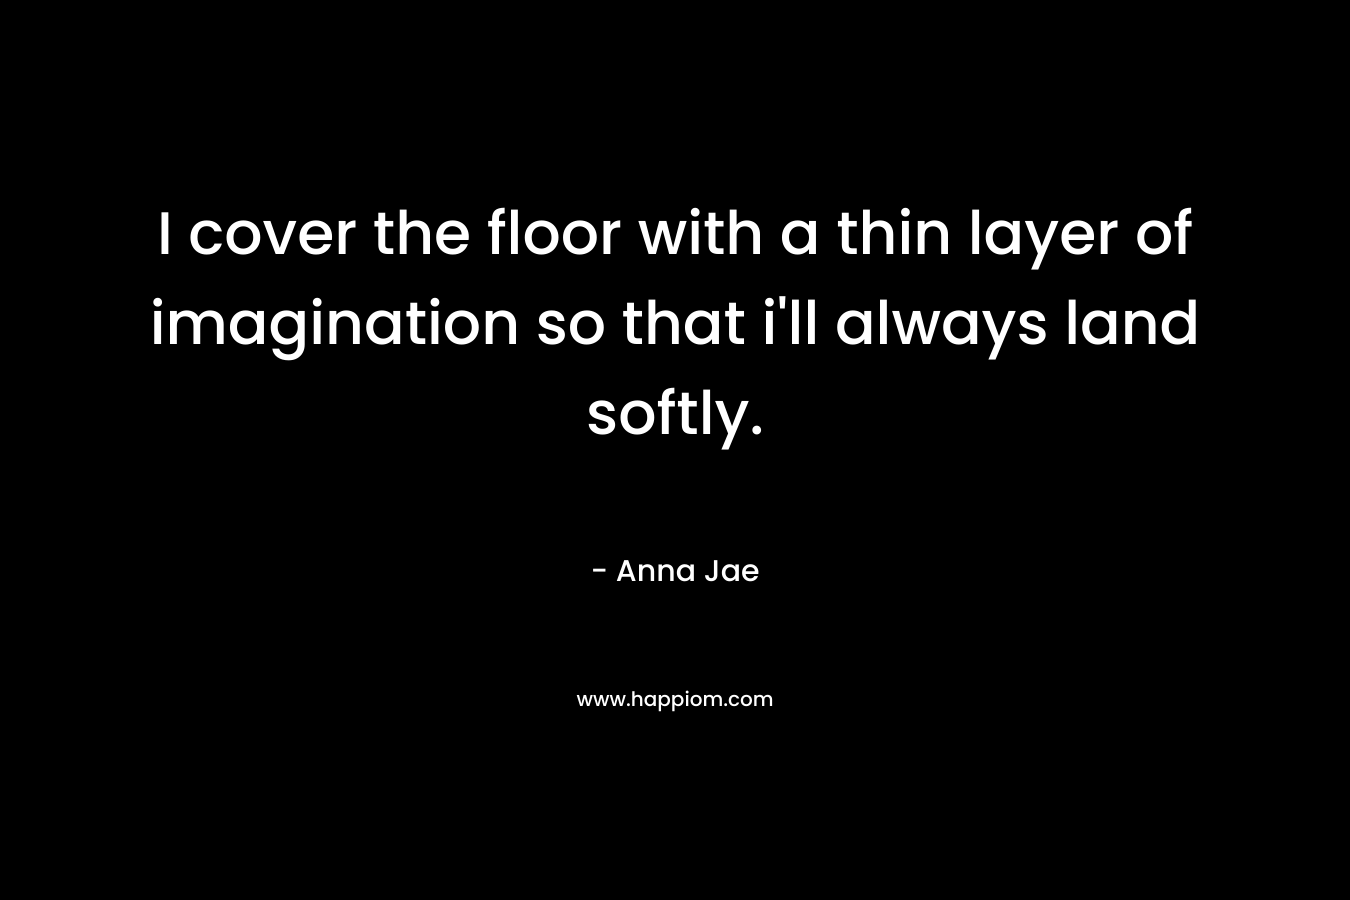 I cover the floor with a thin layer of imagination so that i'll always land softly.